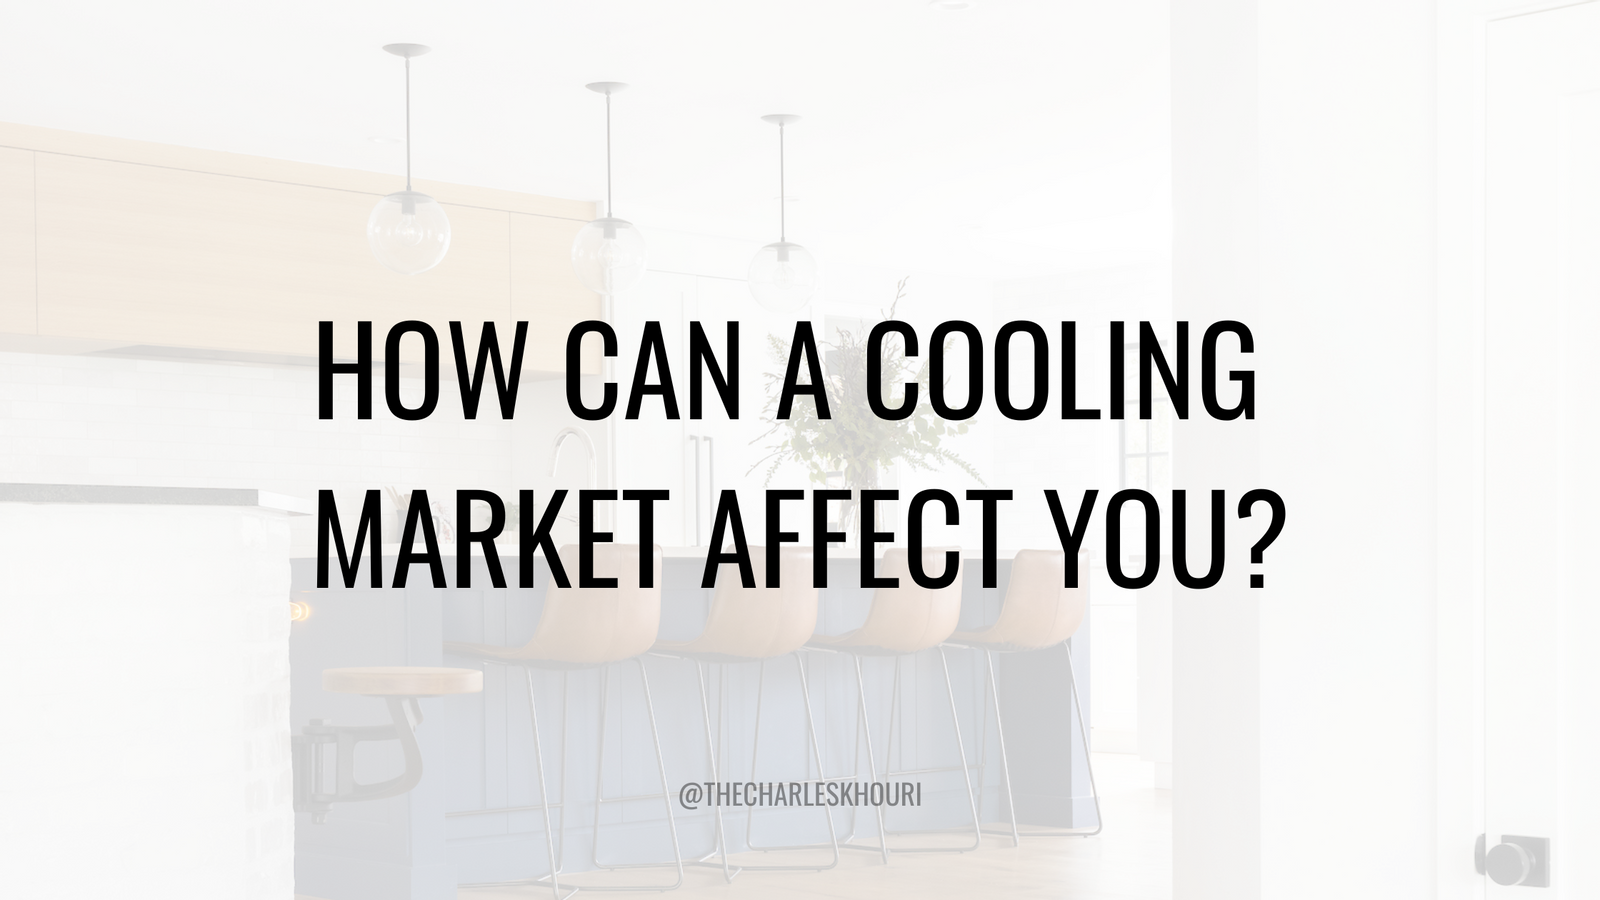 How can a cooling market affect you?